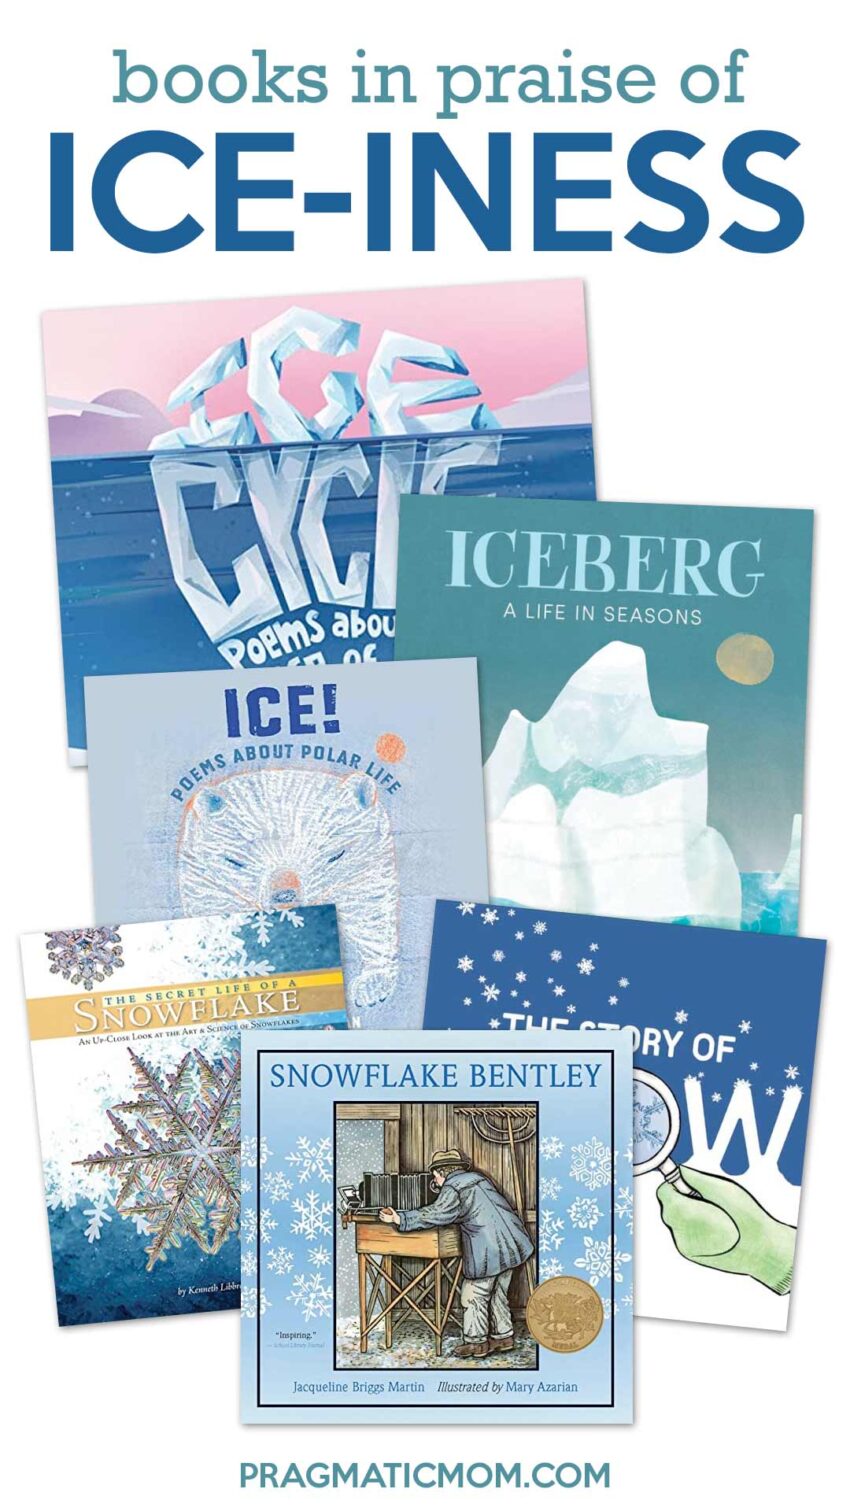 All Hail: Five Books in Praise of Ice-iness